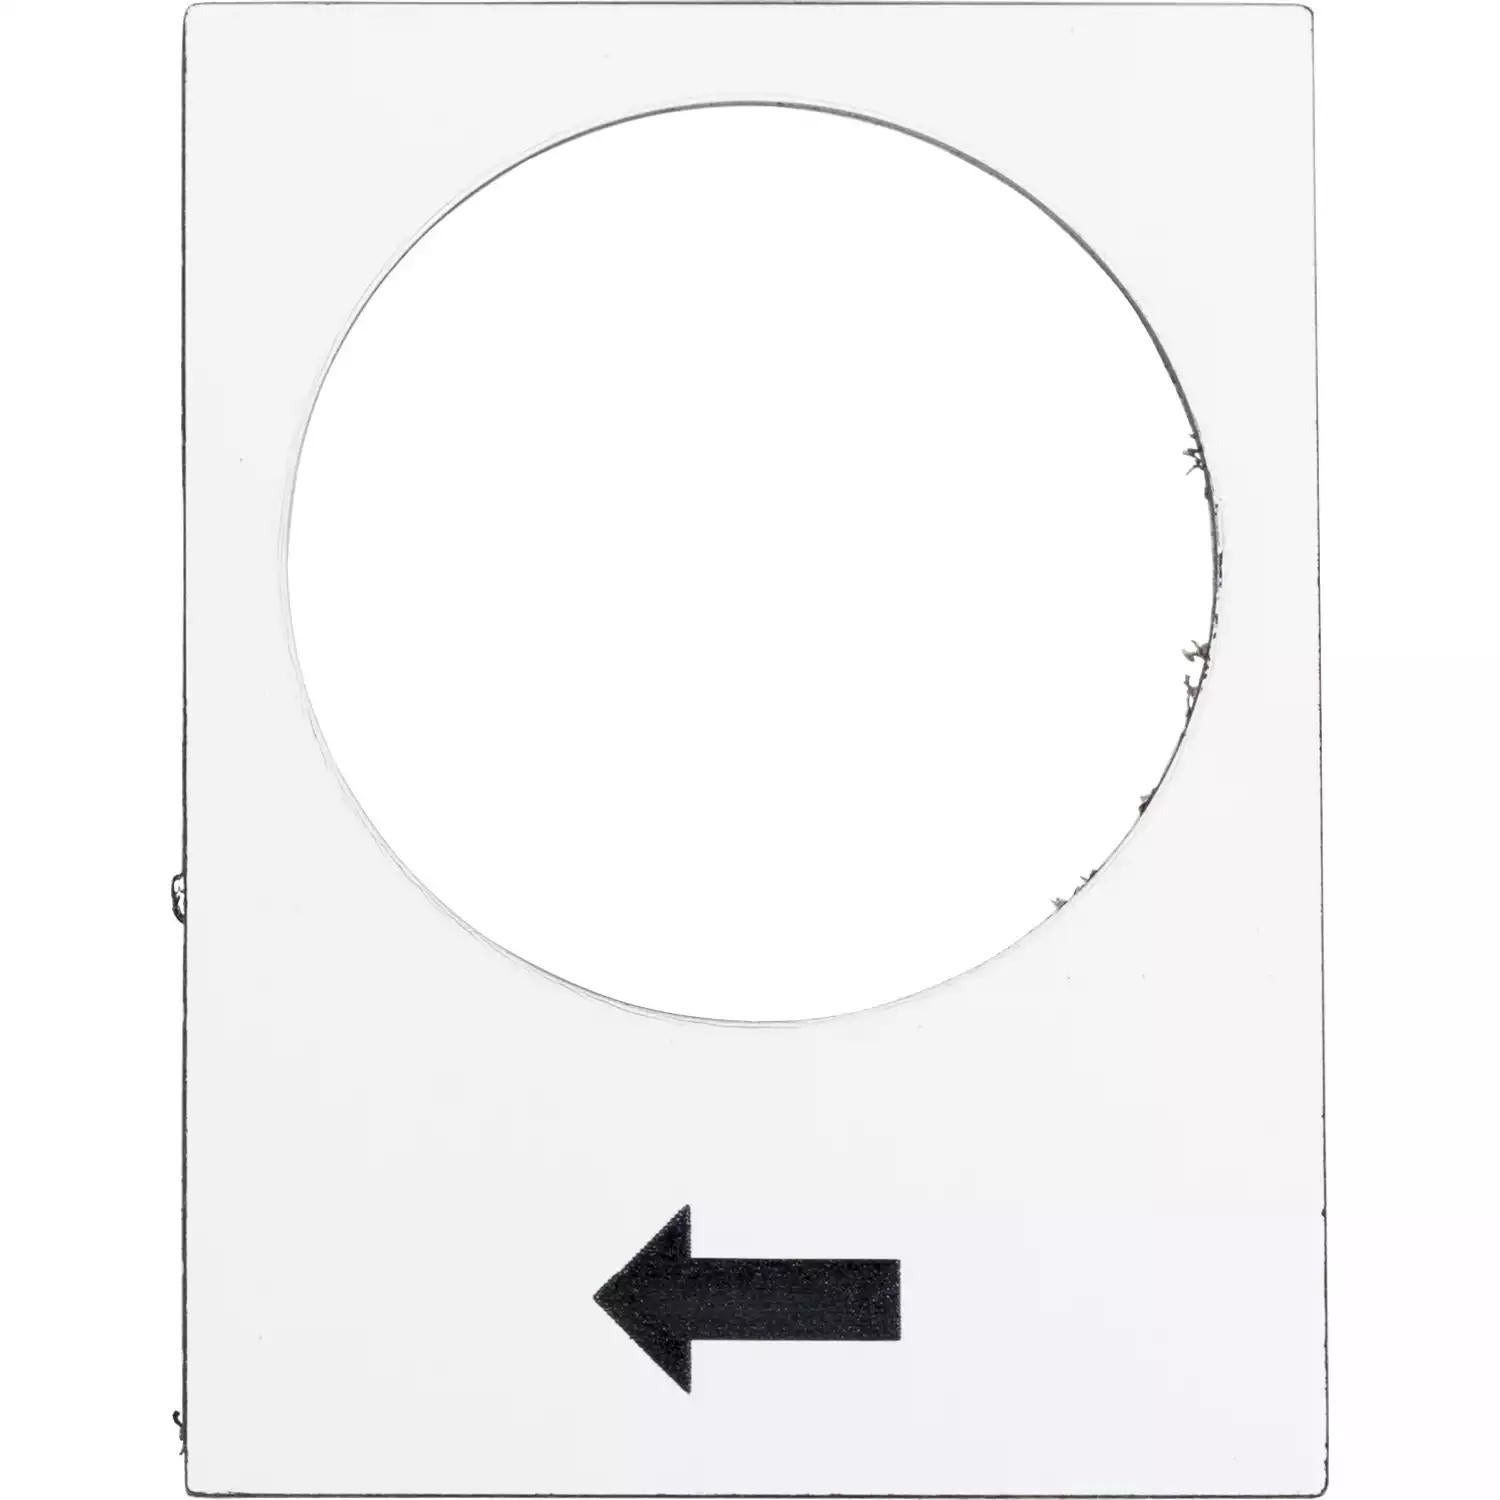 Marked legend, Harmony XAC, nameplate, 30 x 40mm, plastic, white, 22mm push button, black marked arrow